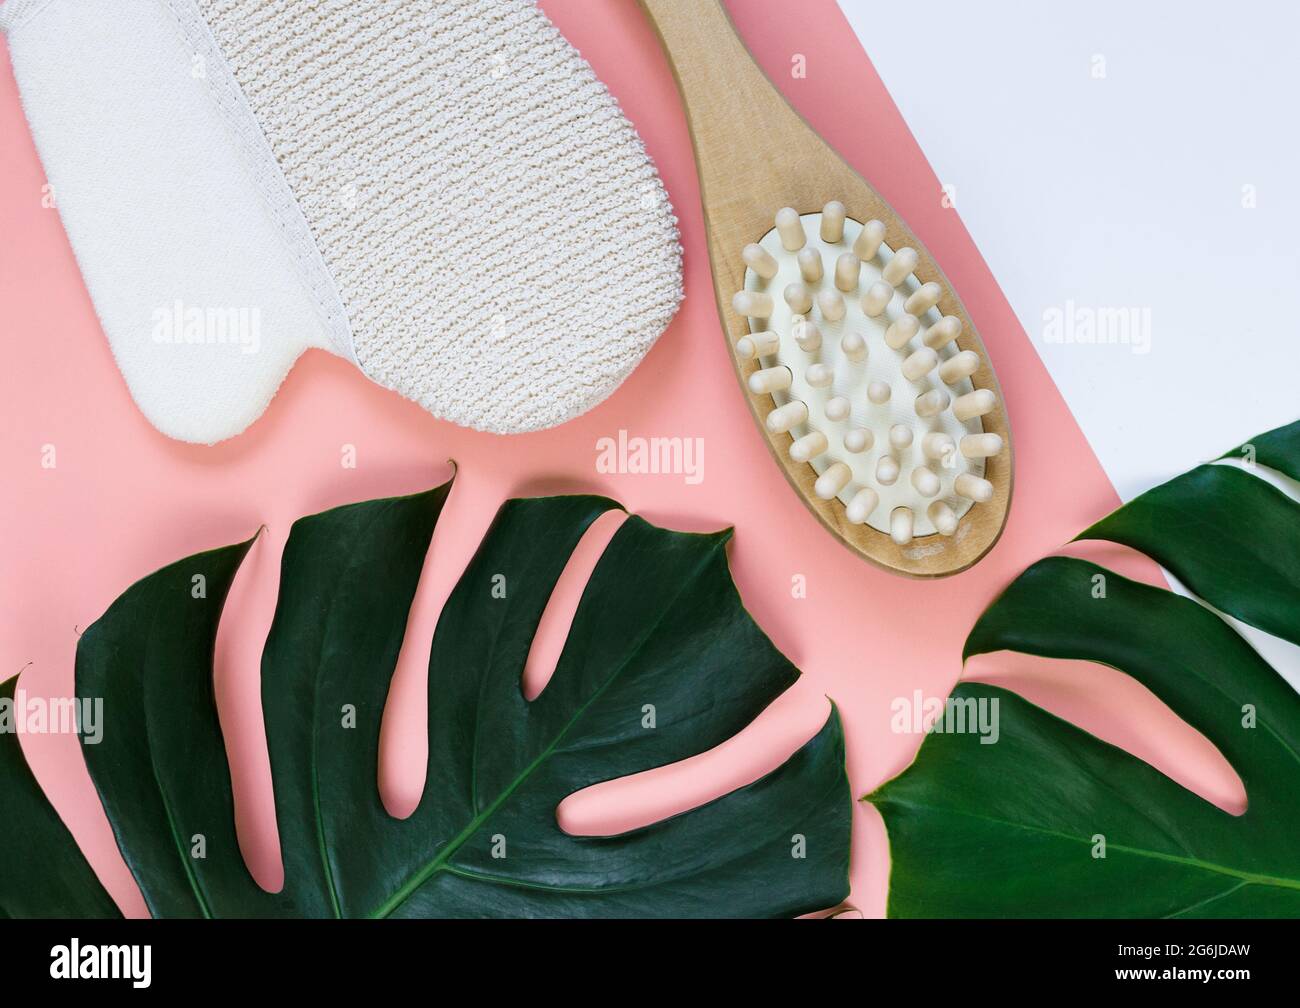 Spa cosmetics background with a massage brush, green monstera palm leaves. Body, face, skin care, anticellulite concept. Stock Photo